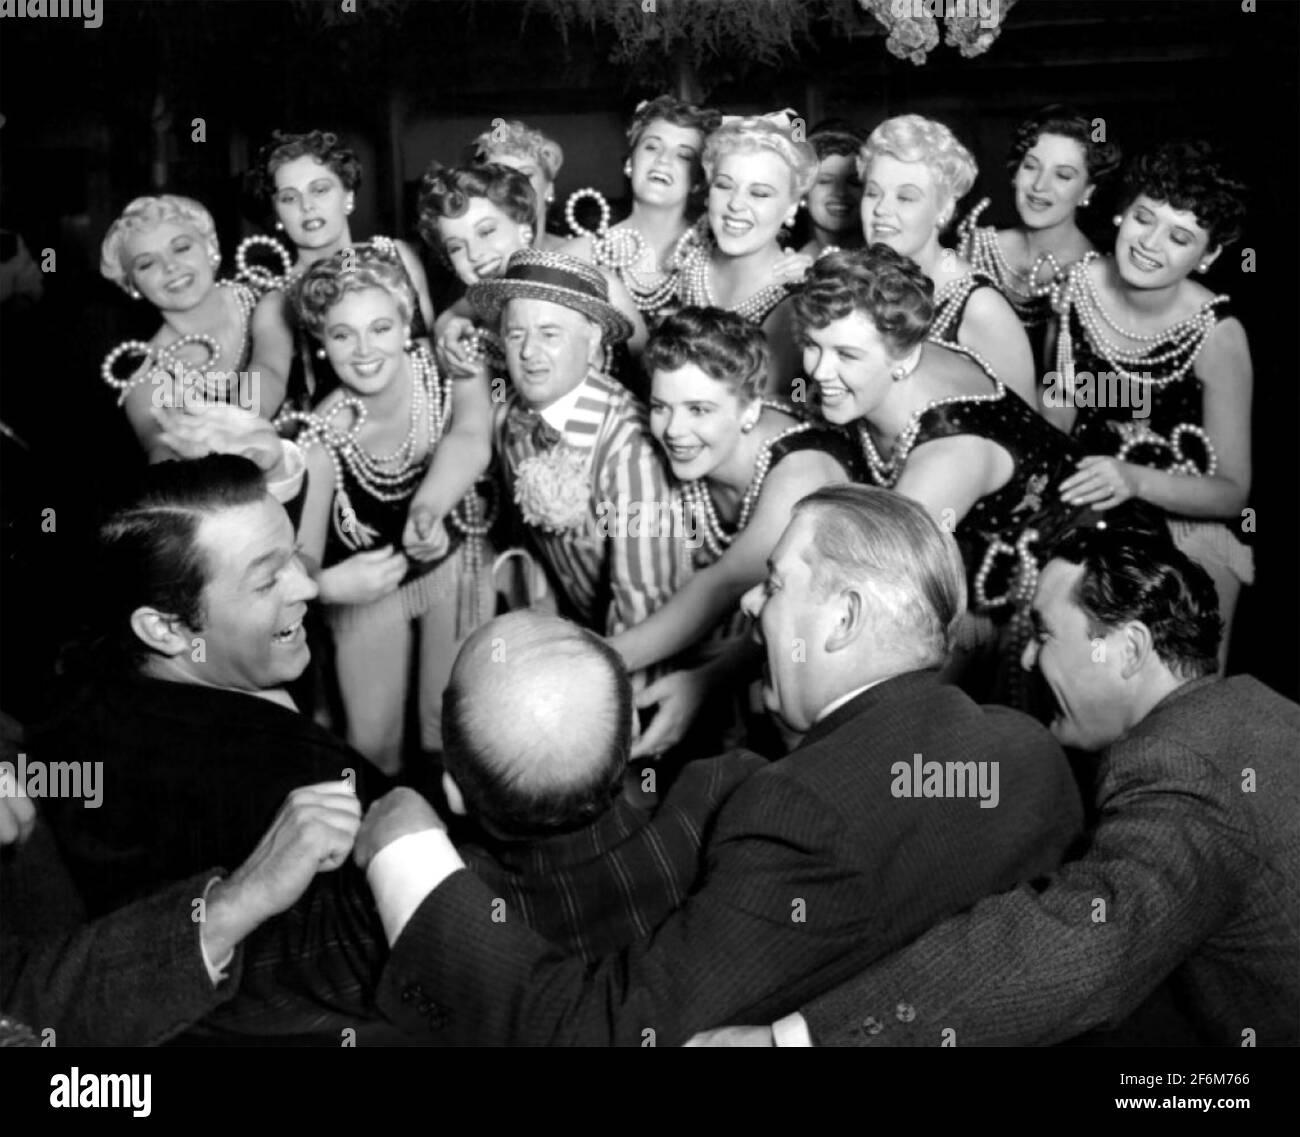 CITIZEN KANE 1941 RKO Radio Pictures film - the Inquirer party scene with Orson Welles at left and chorus girls led by Charles Bennett. Stock Photo